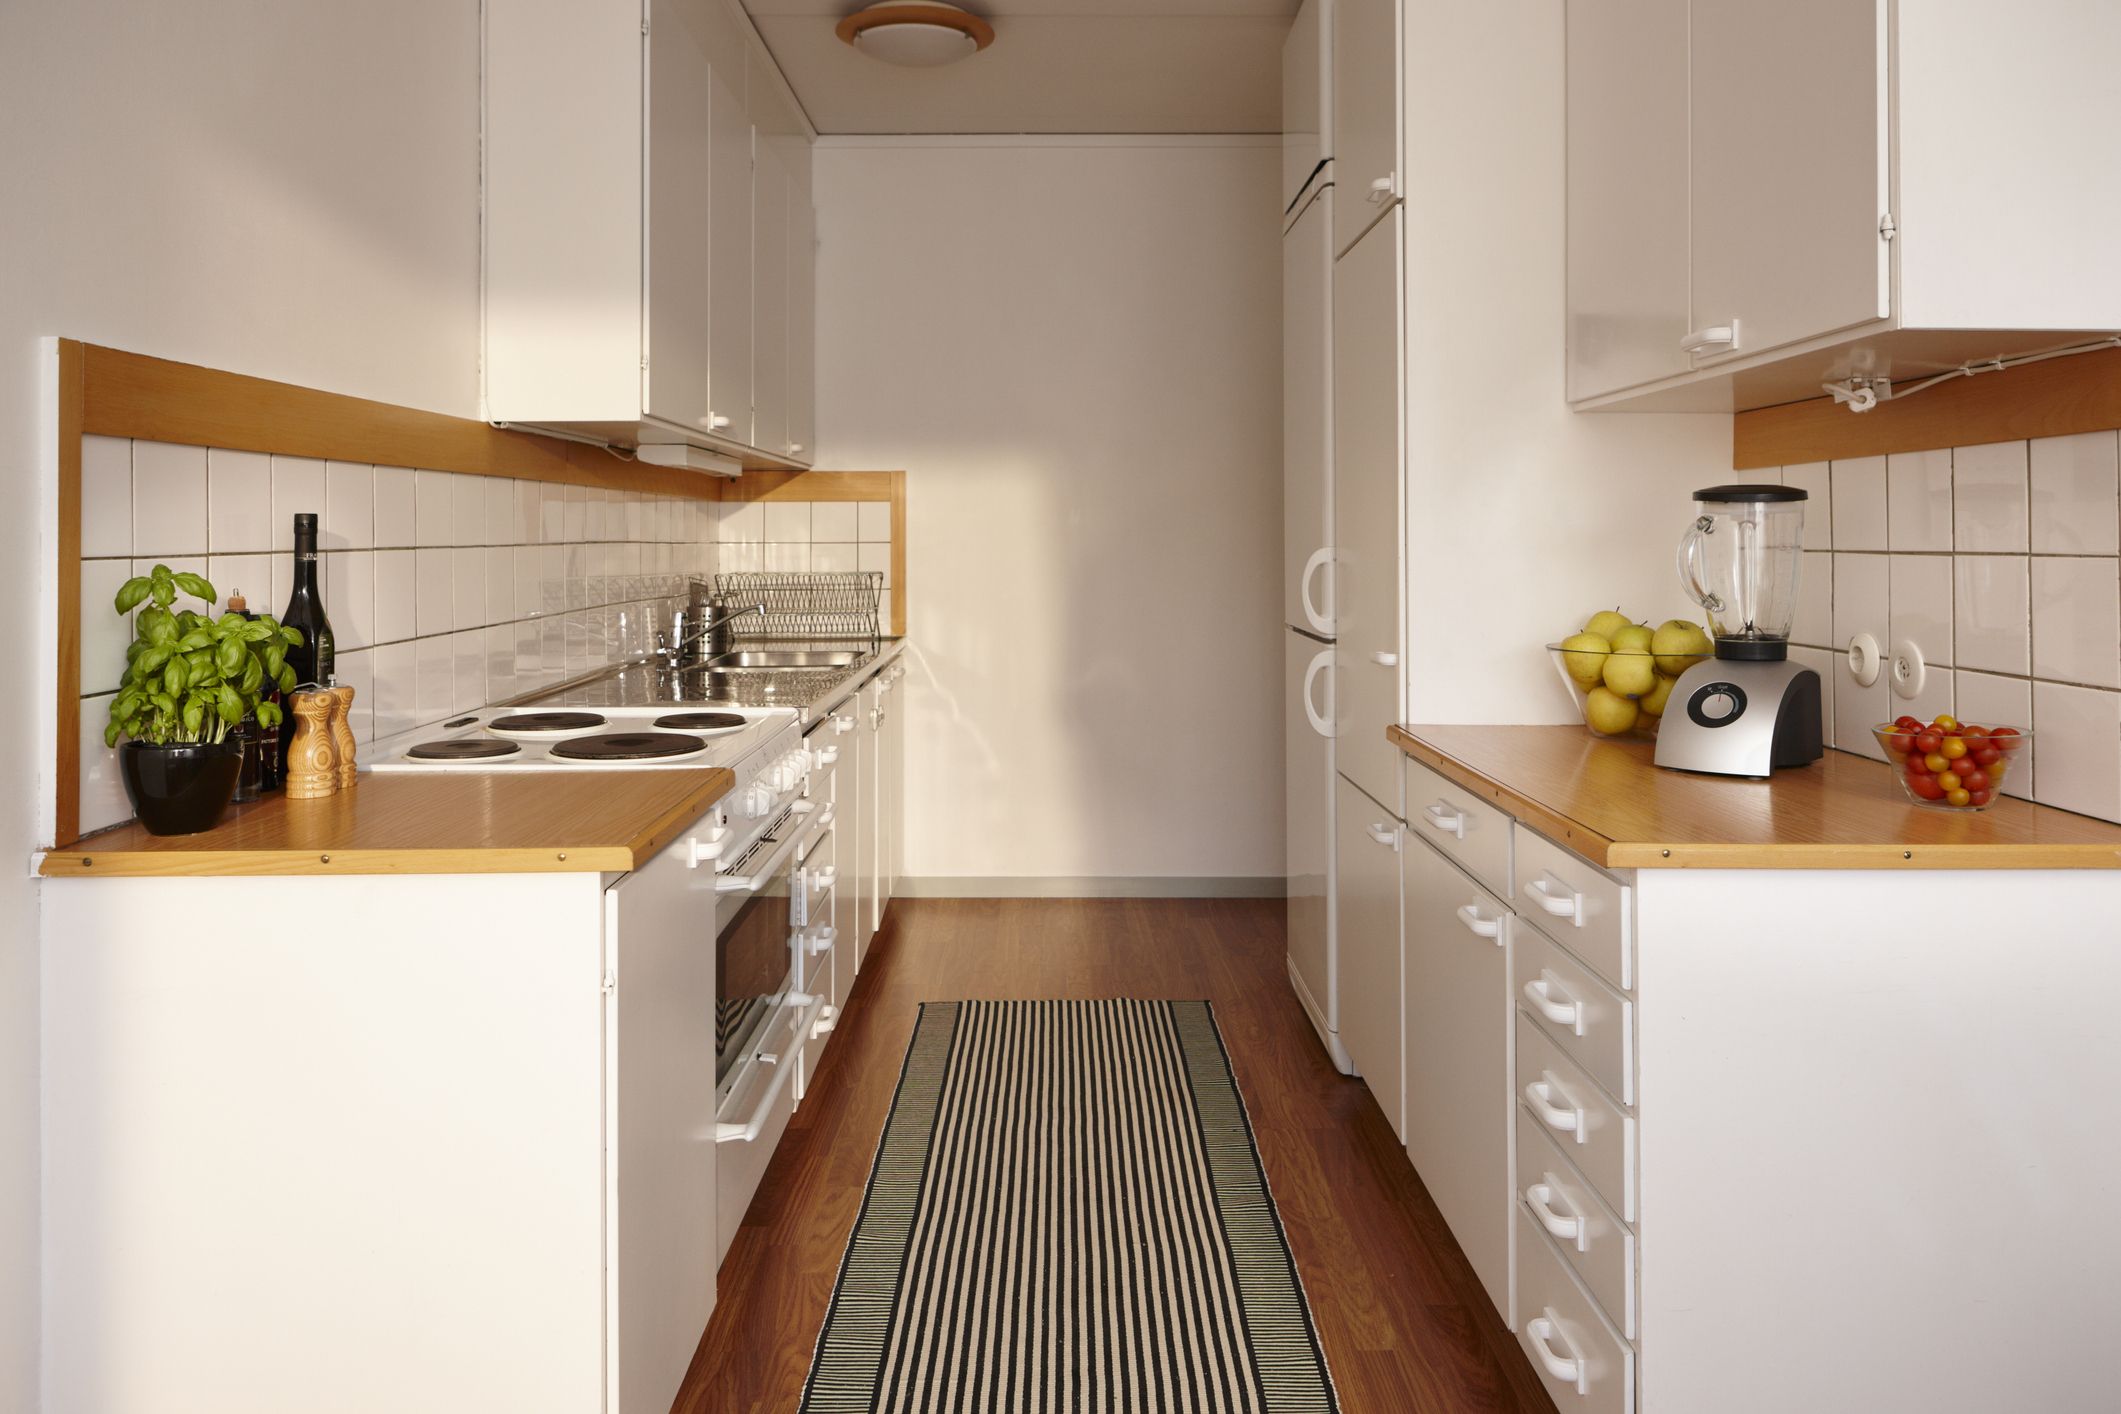 What Is a Galley Kitchen? - Galley Kitchen Pros and Cons